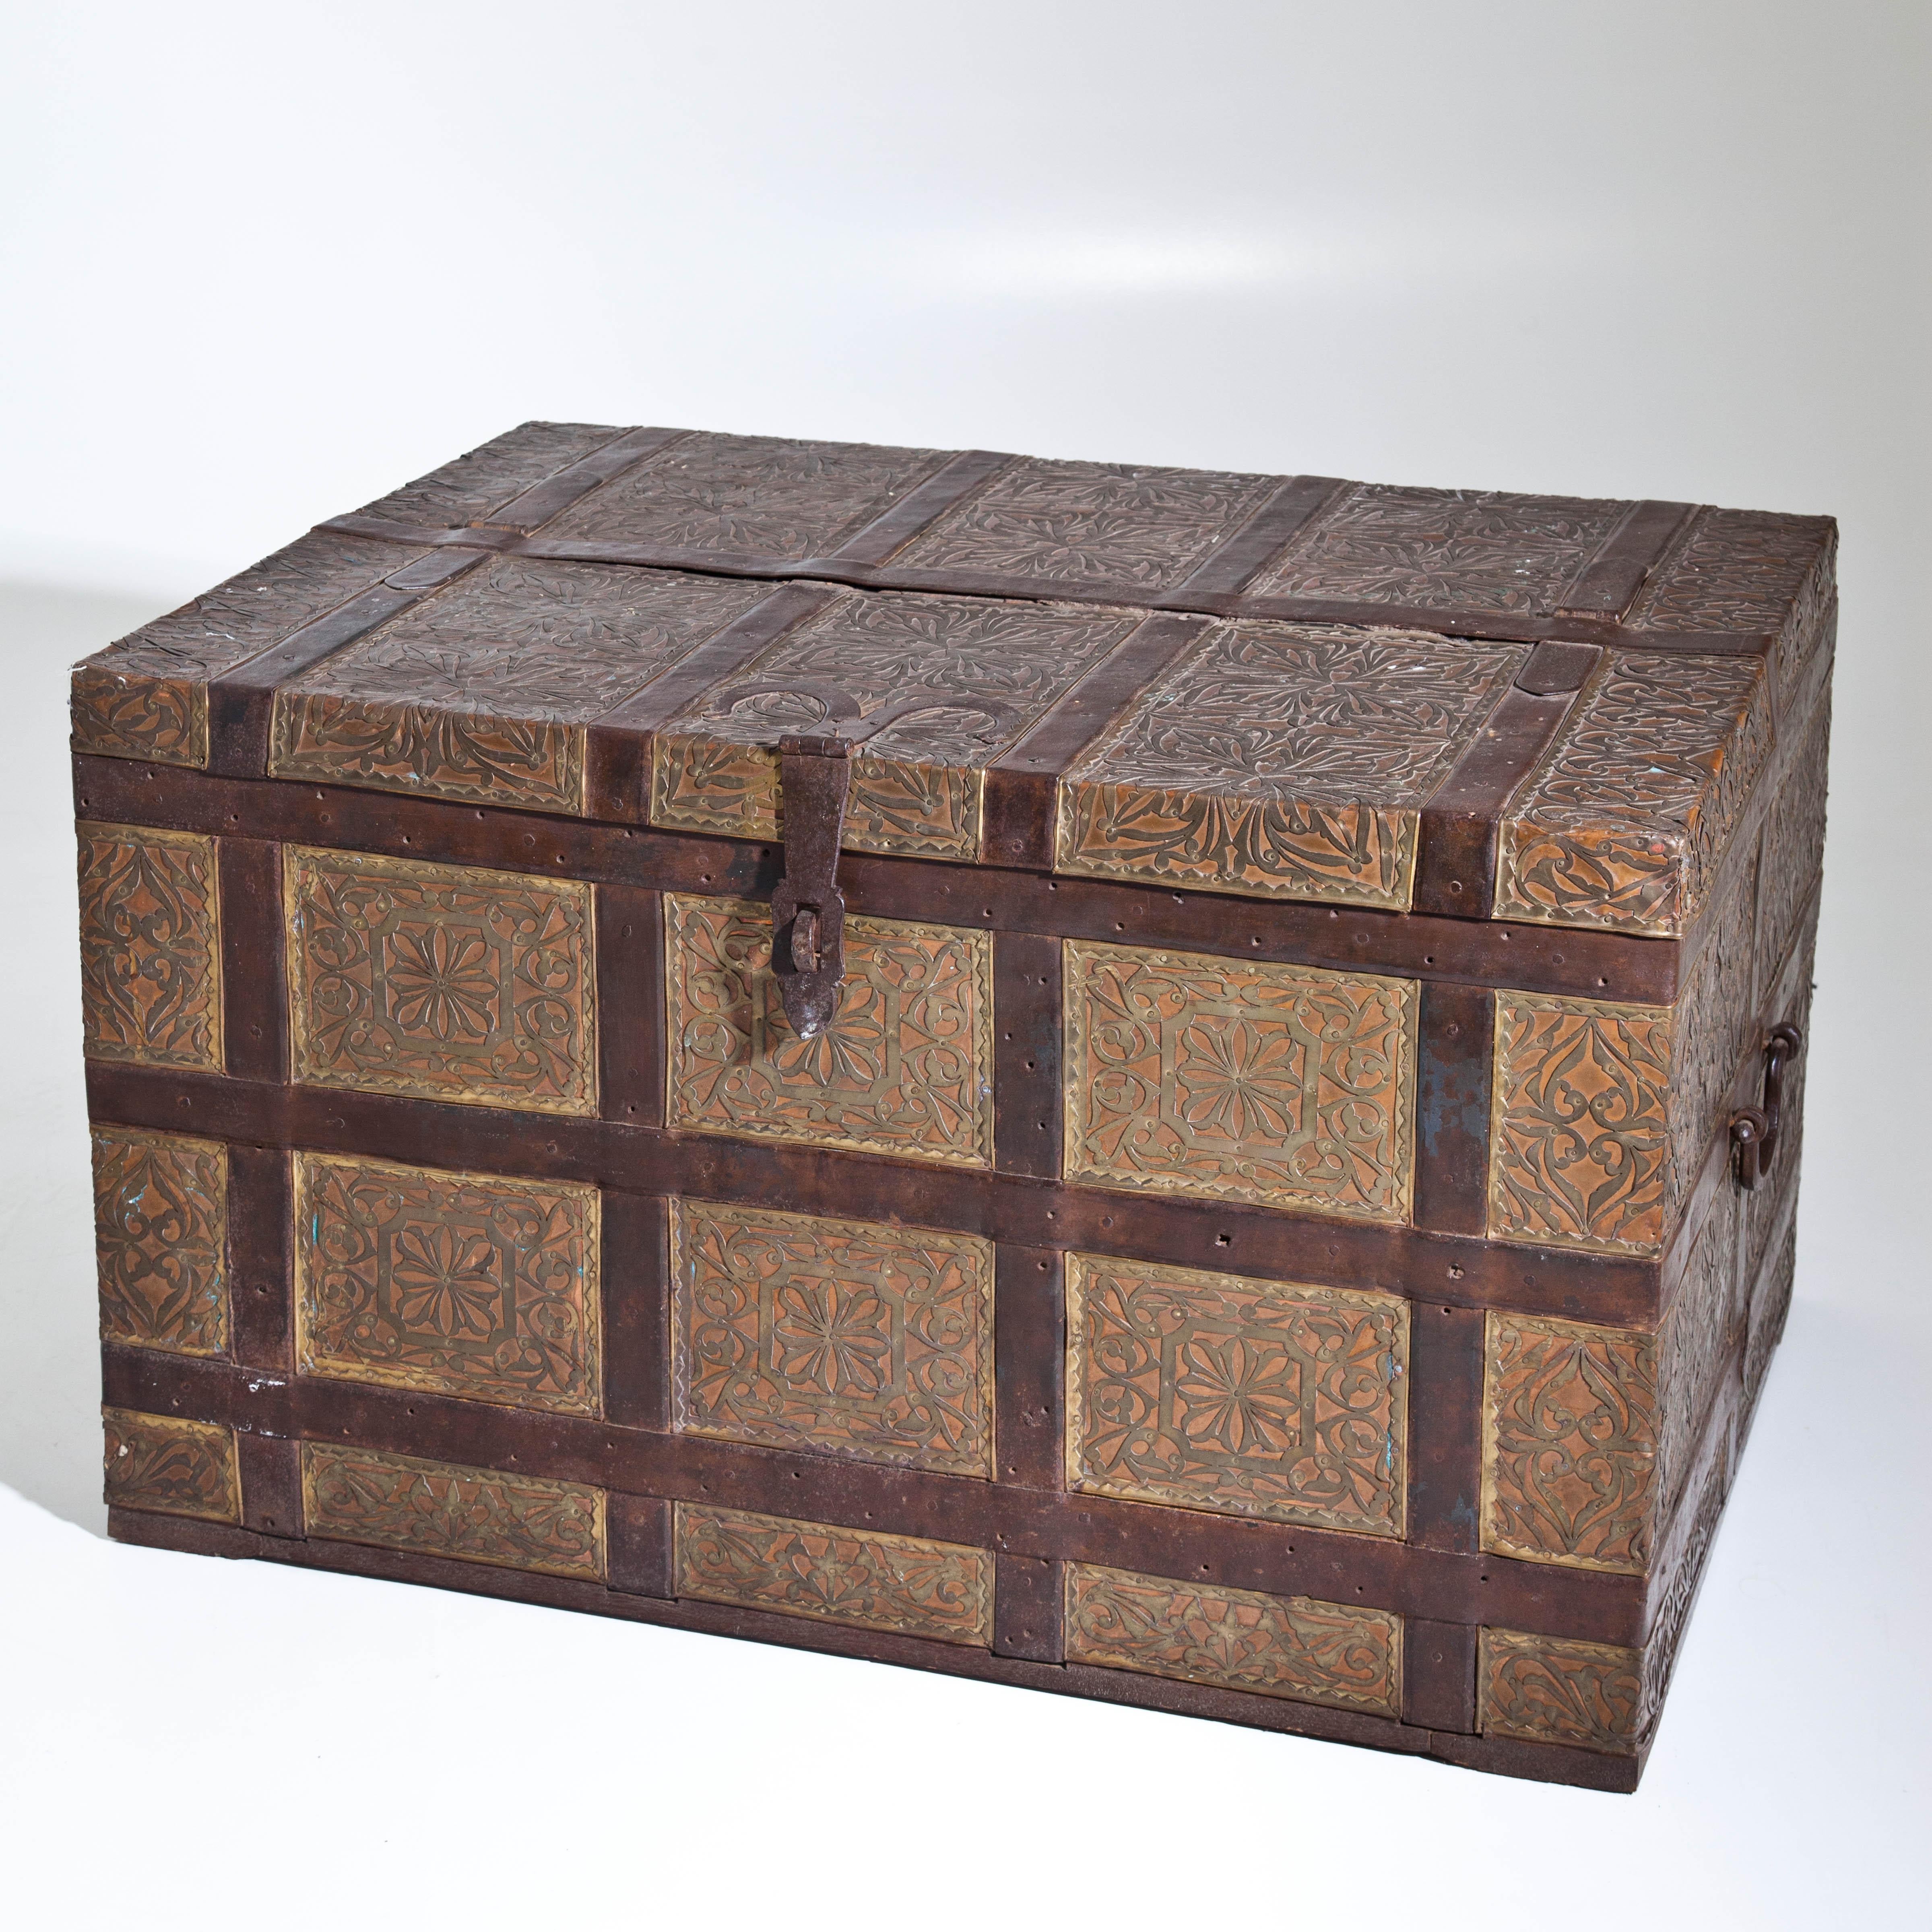 Large lidded chest with brass and copper fittings and leather cover as well as side handles.